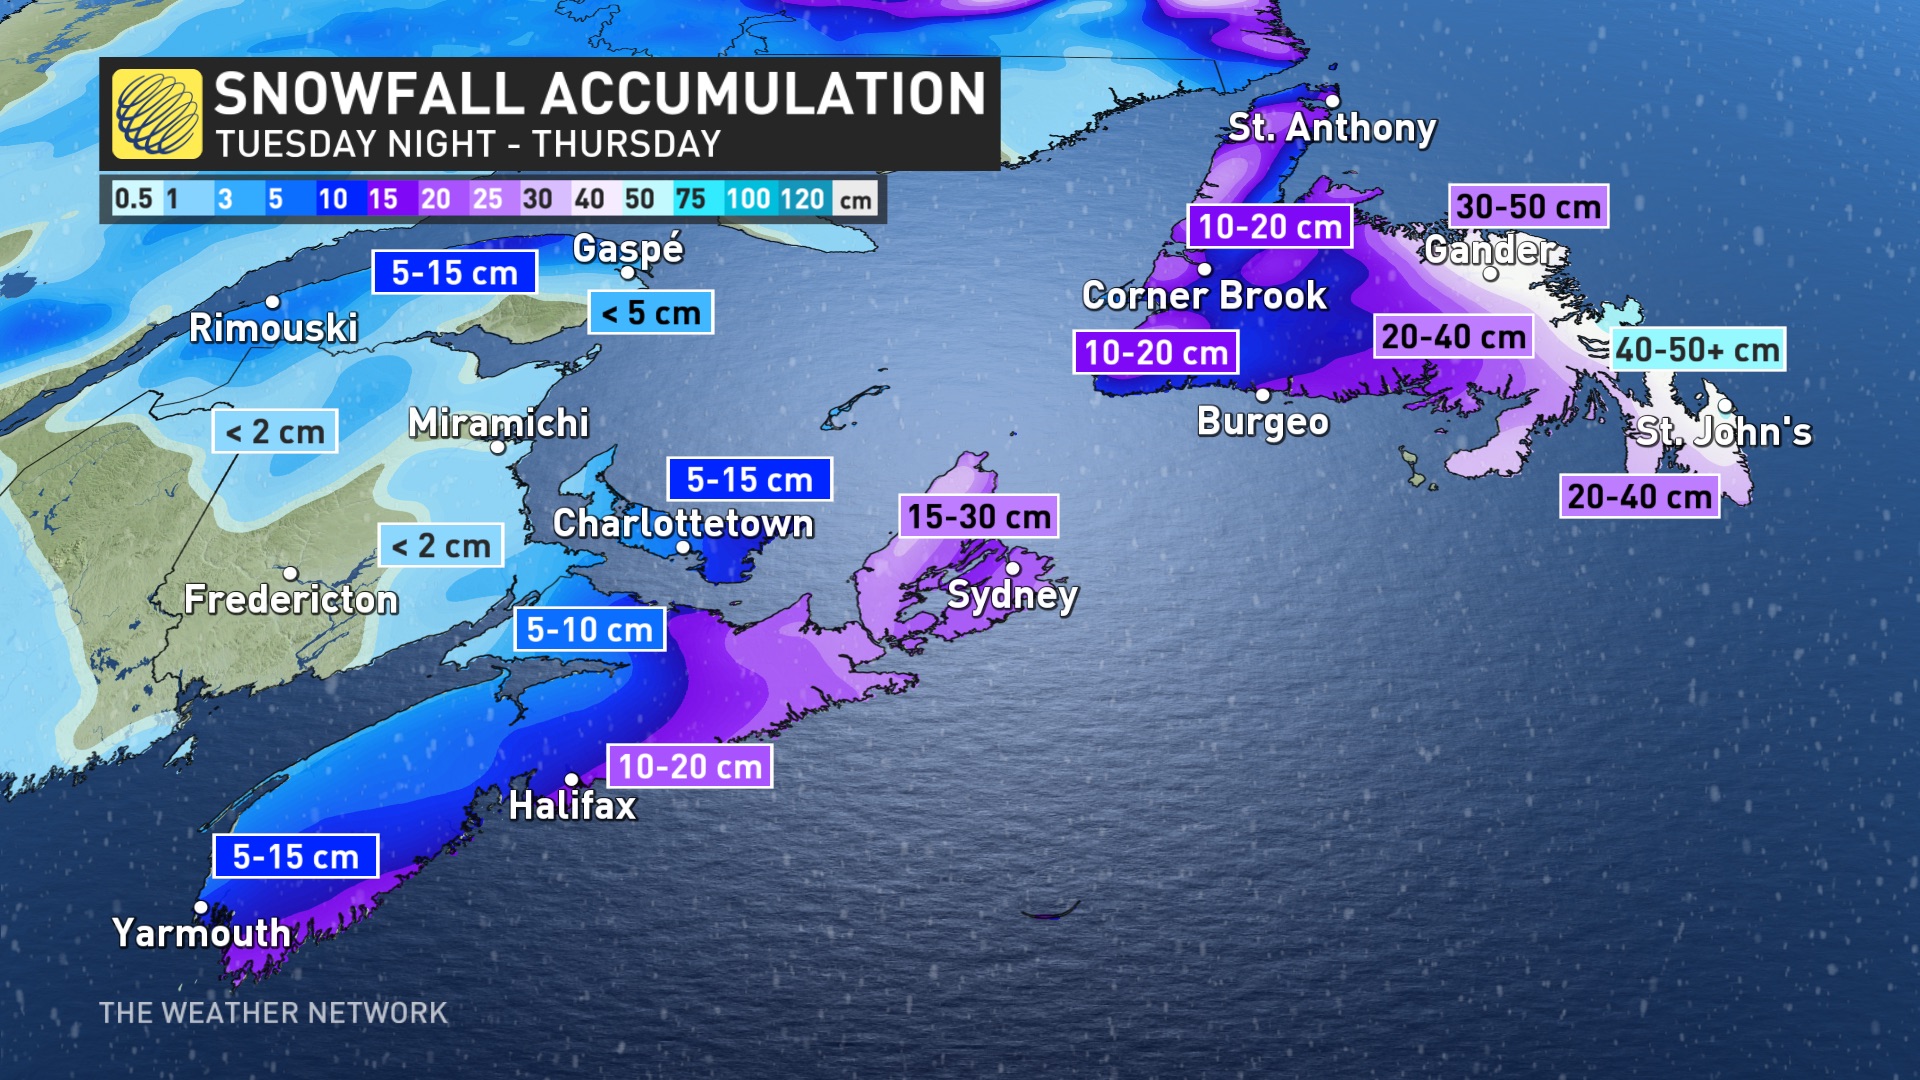 major storm could bring 50+ cm of snow to parts of atlantic canada